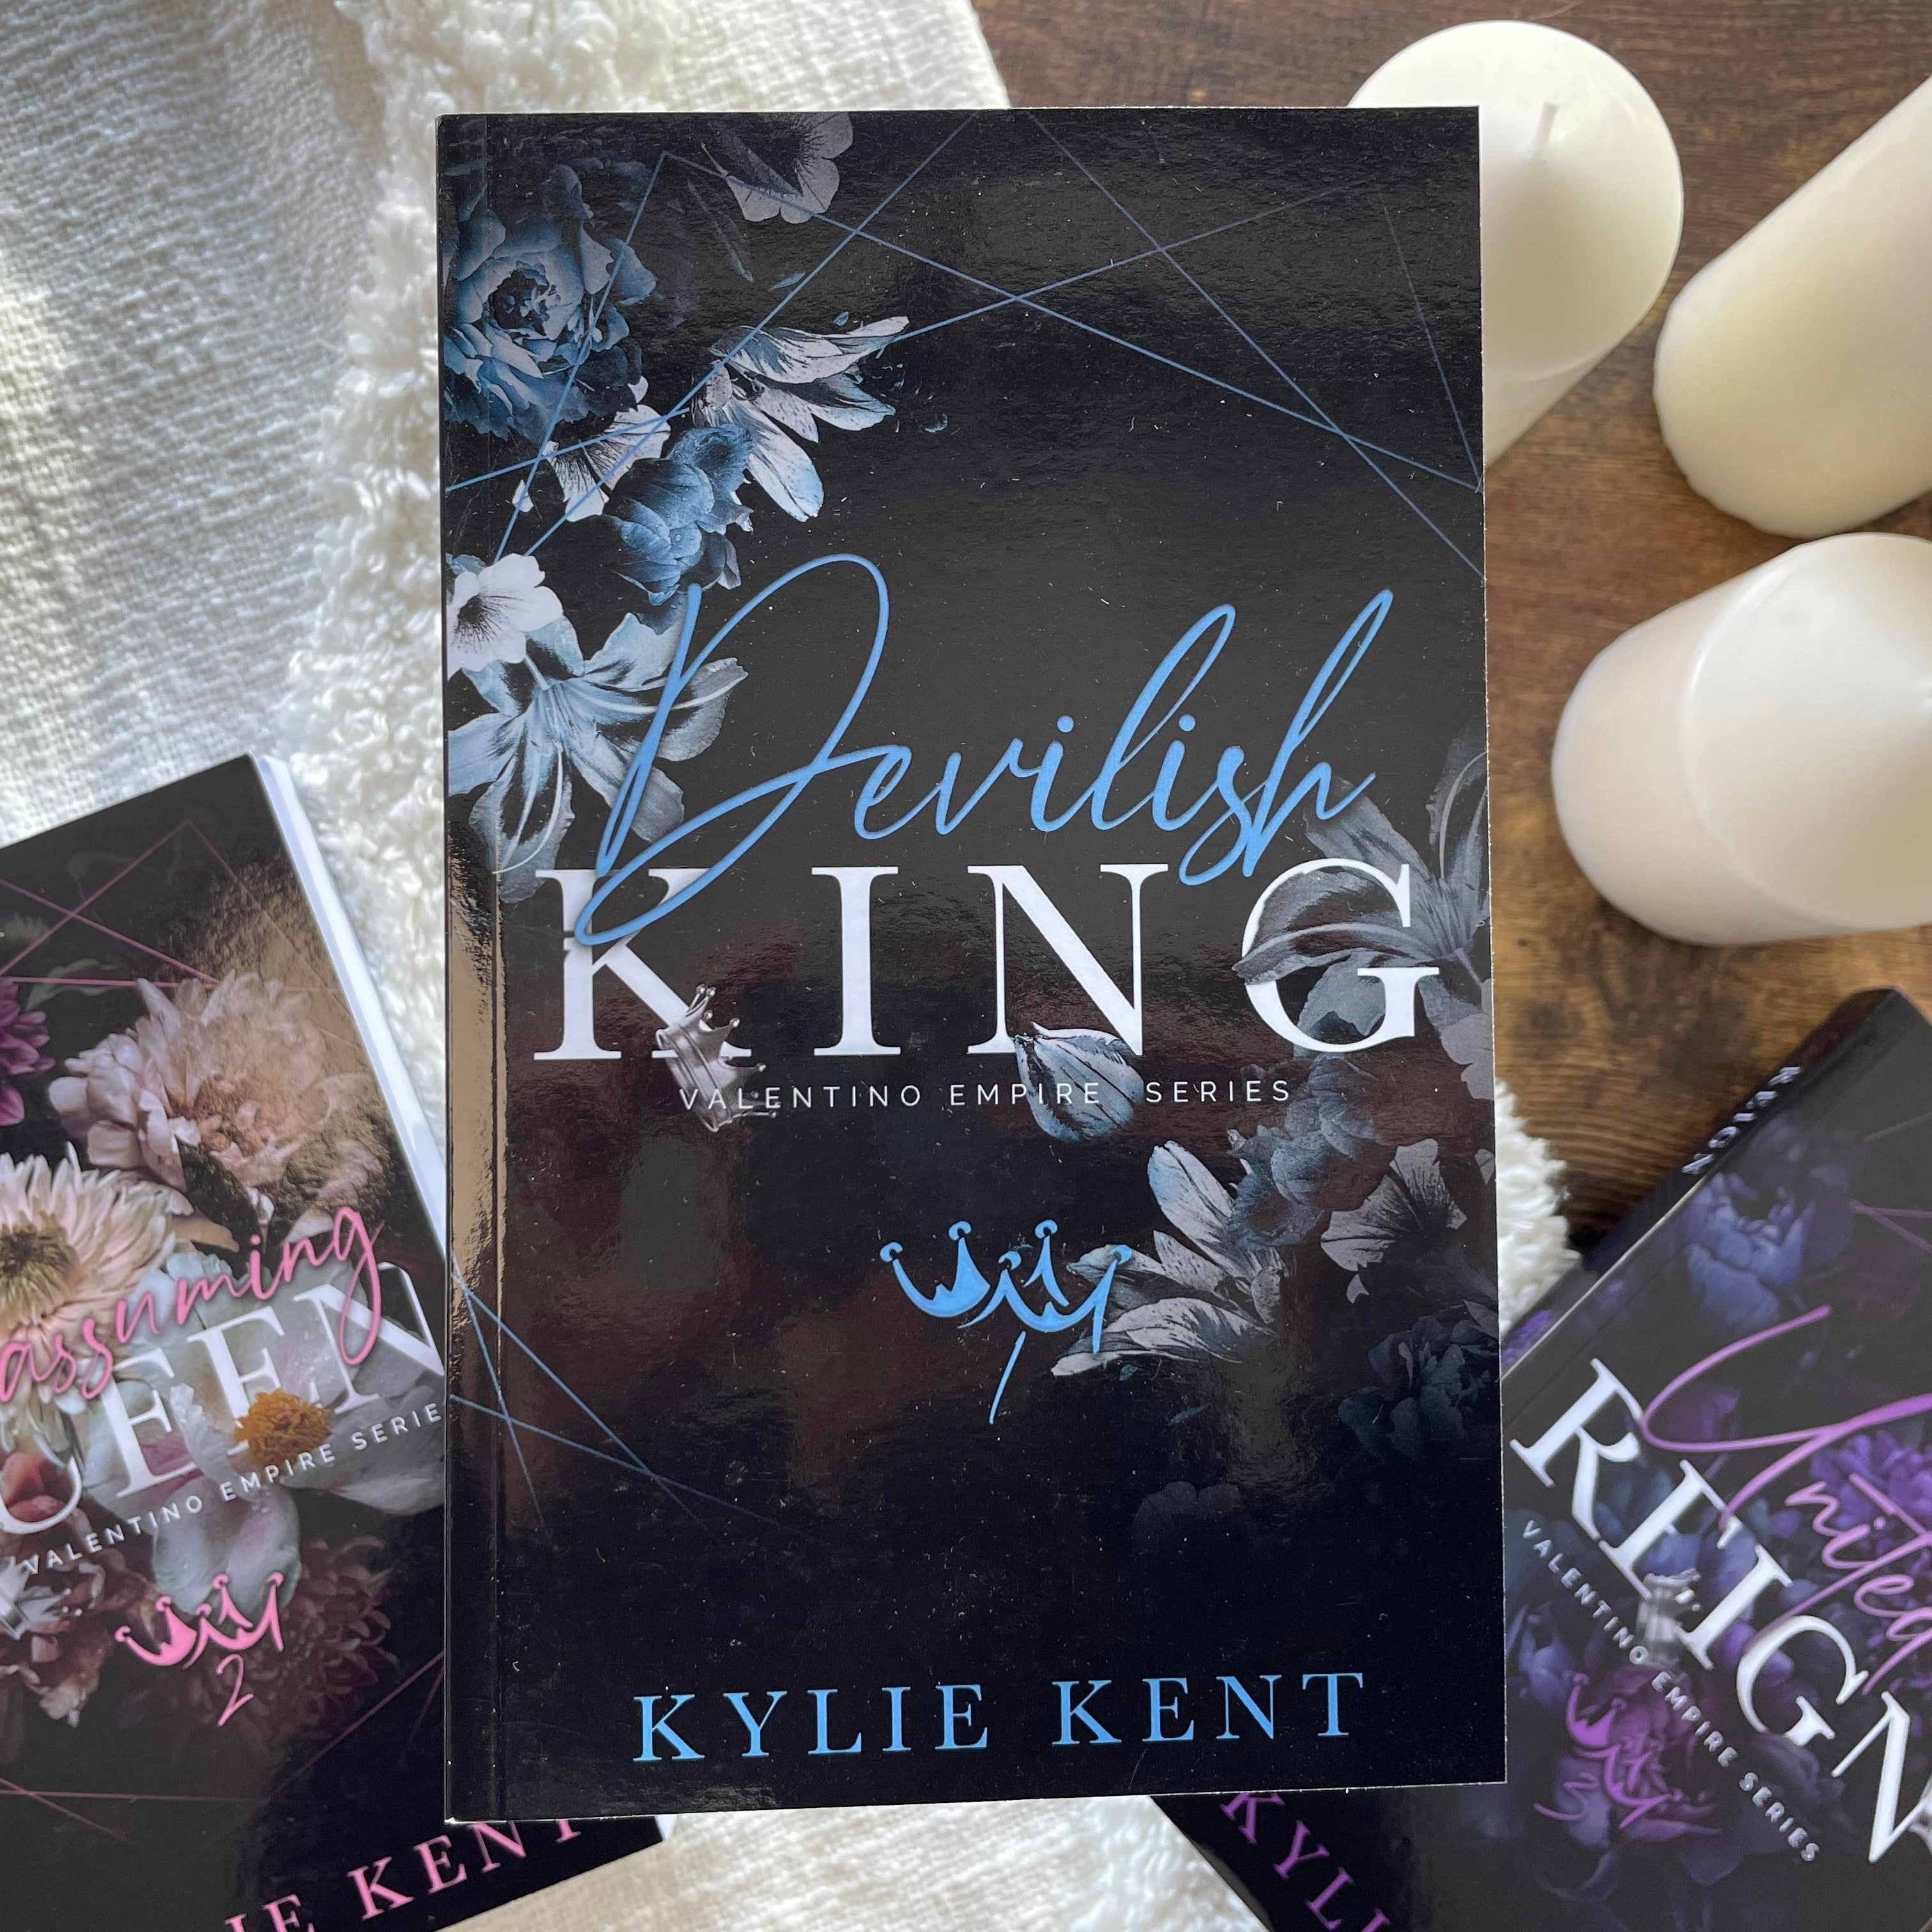 Valentino Empire series by Kylie Kent